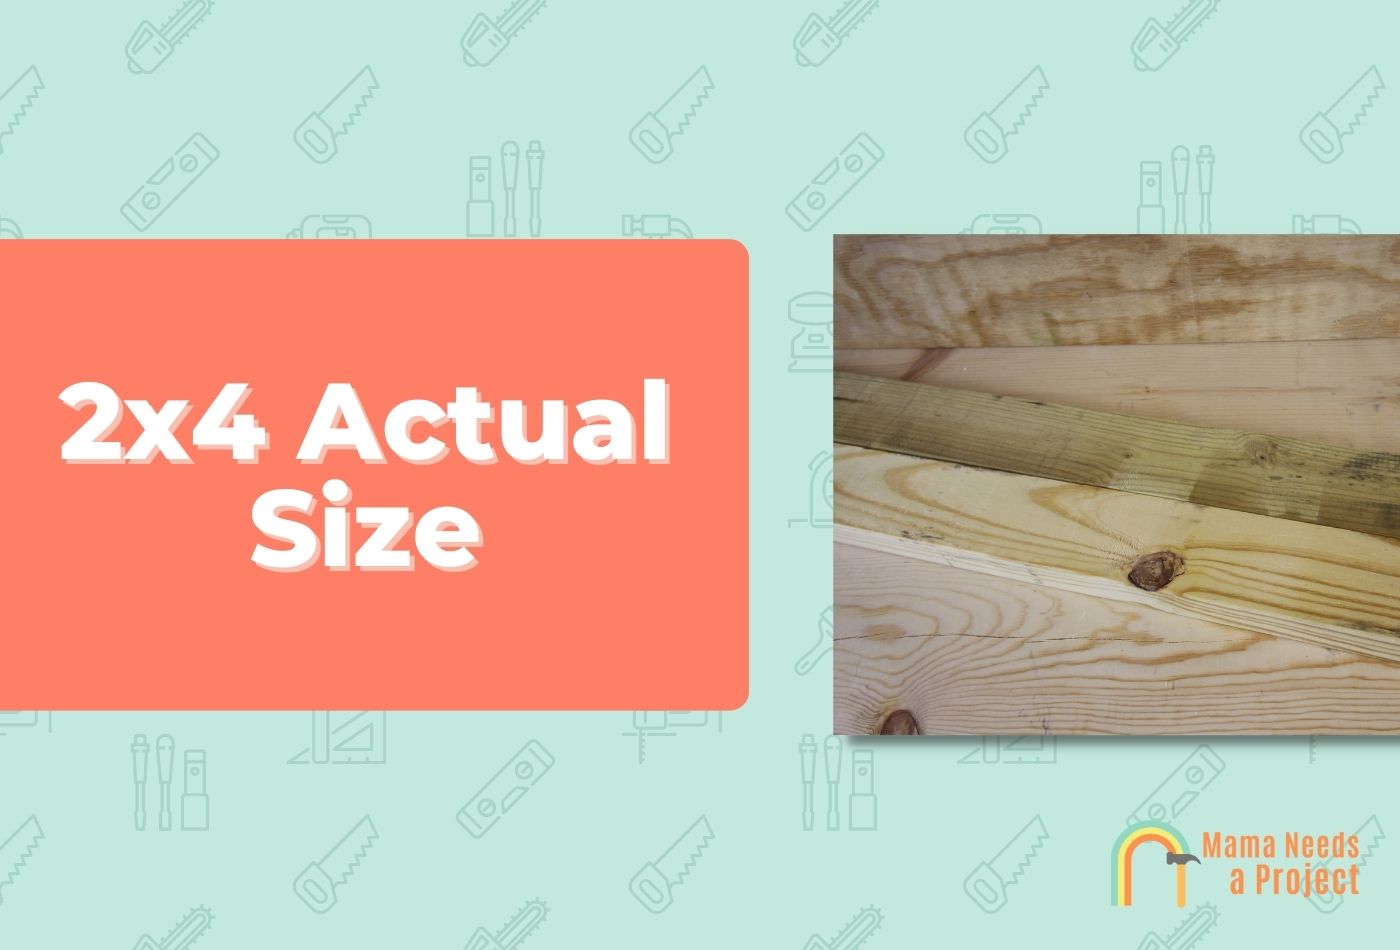 2x4 Actual Size